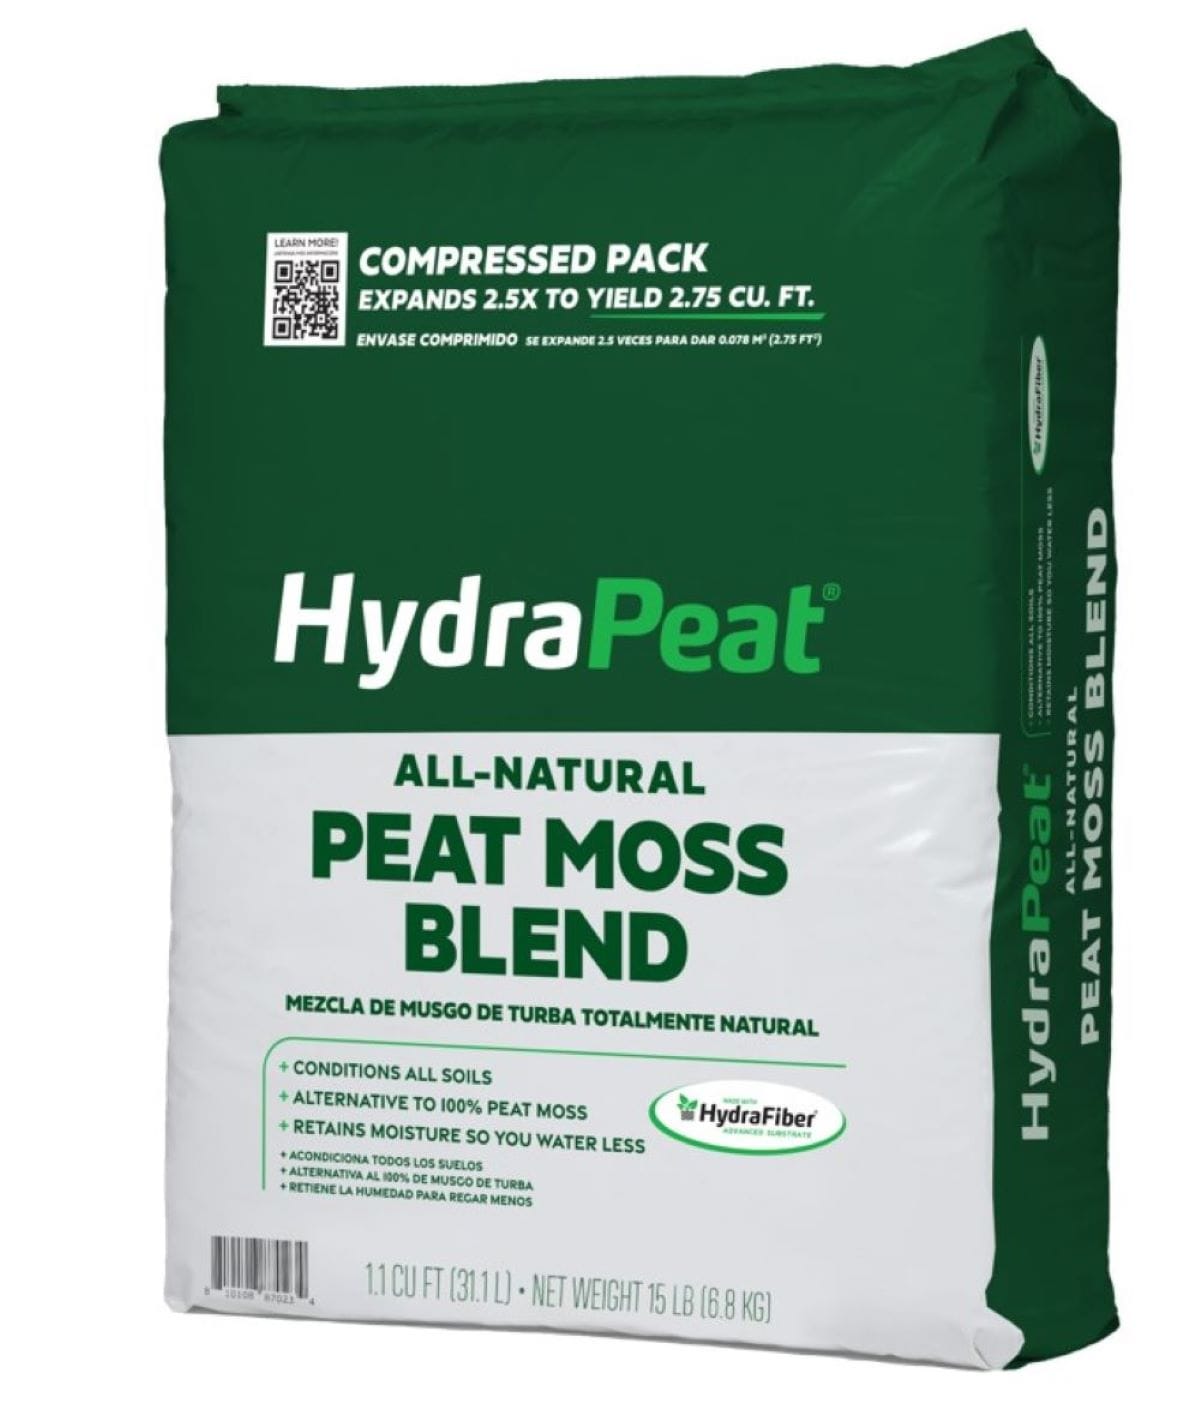 PSA: Don't use peat moss as a substrate. : r/Aquariums